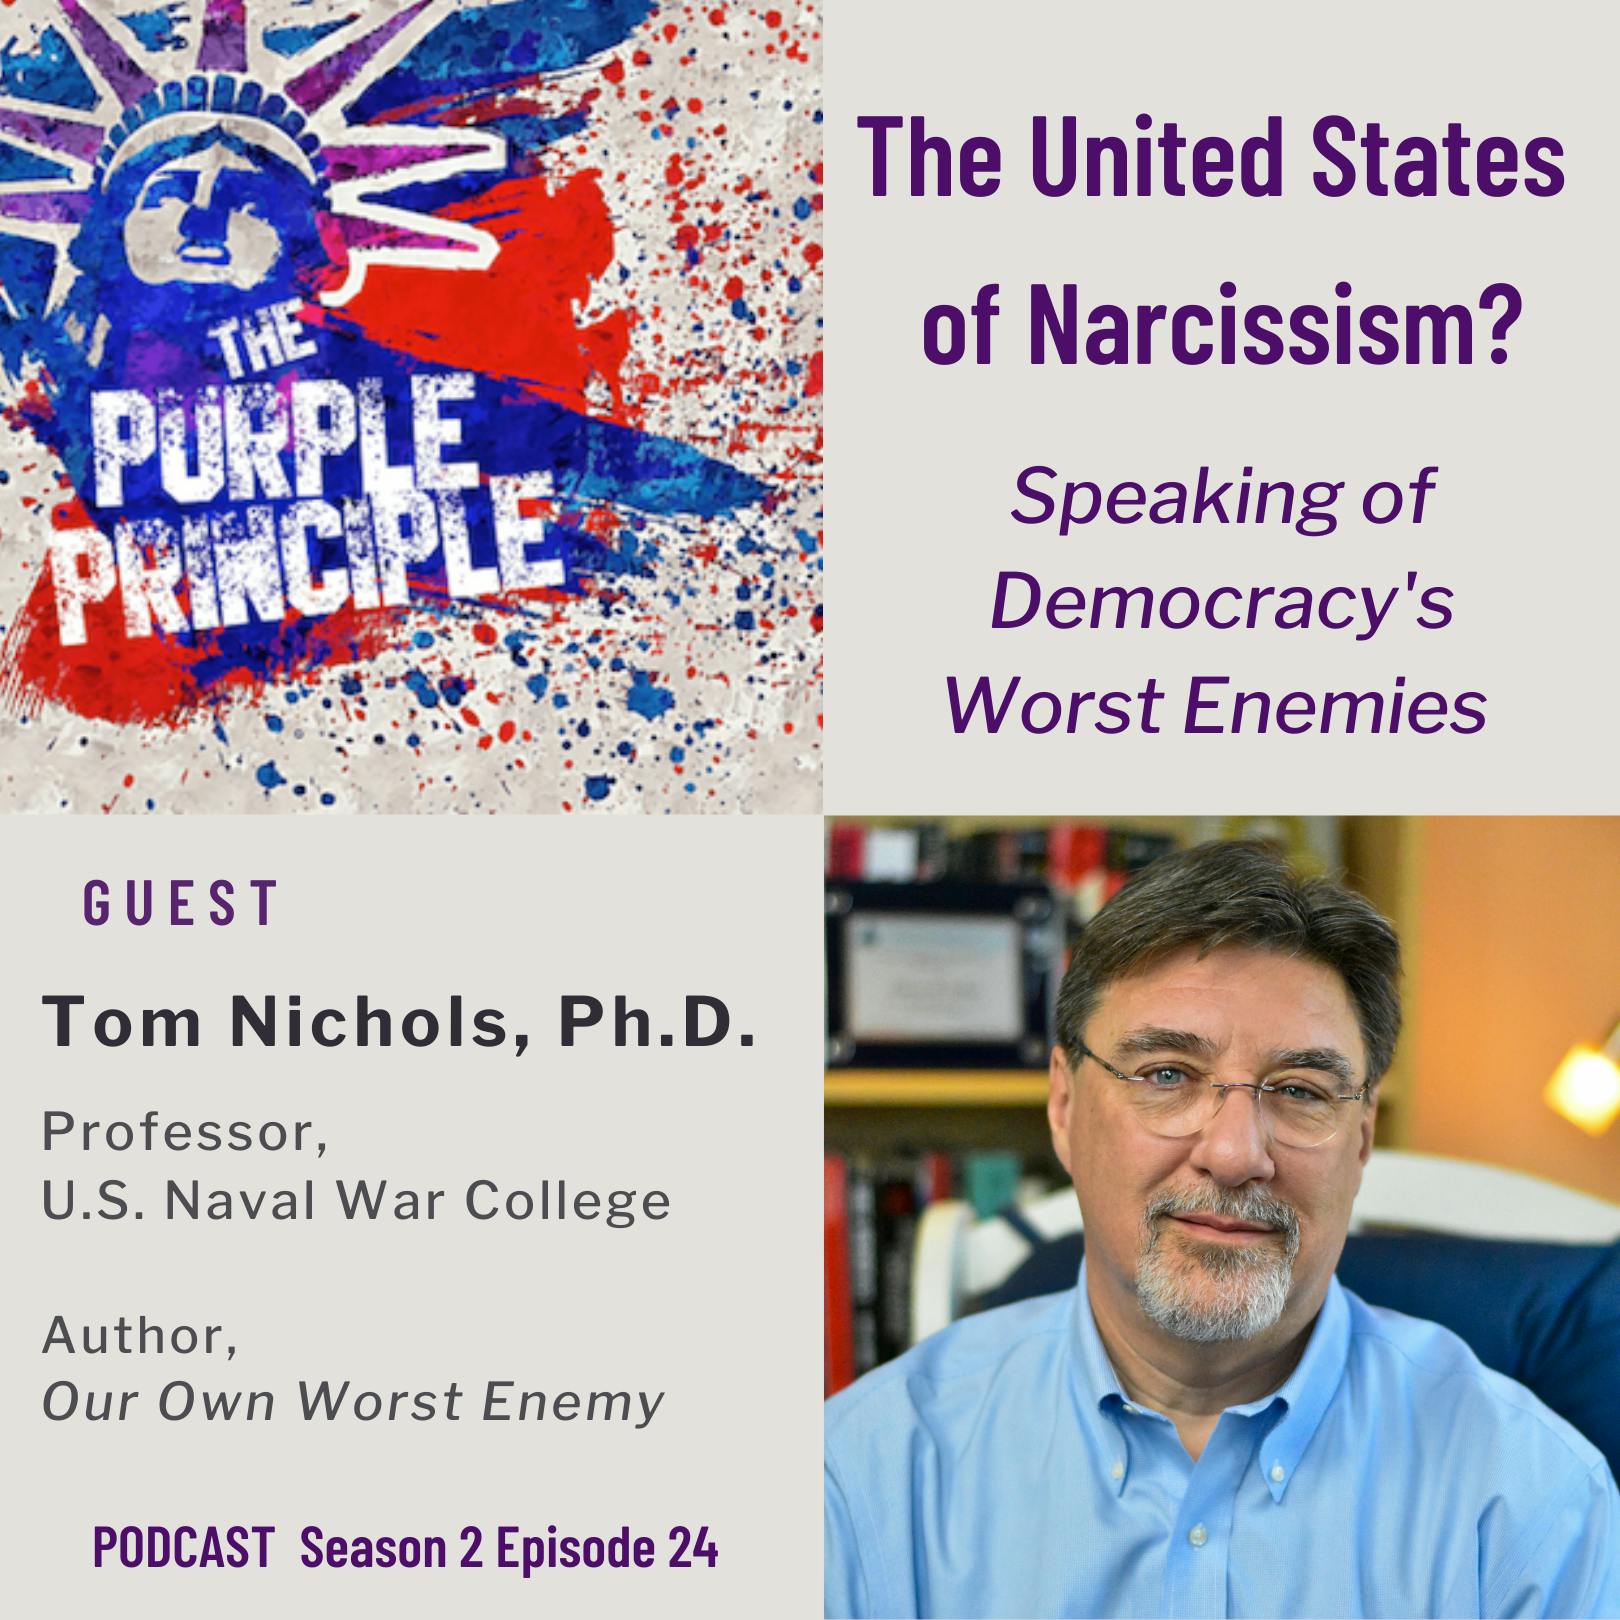 The United States of Narcissism? Speaking of Democracy’s Worst Enemies